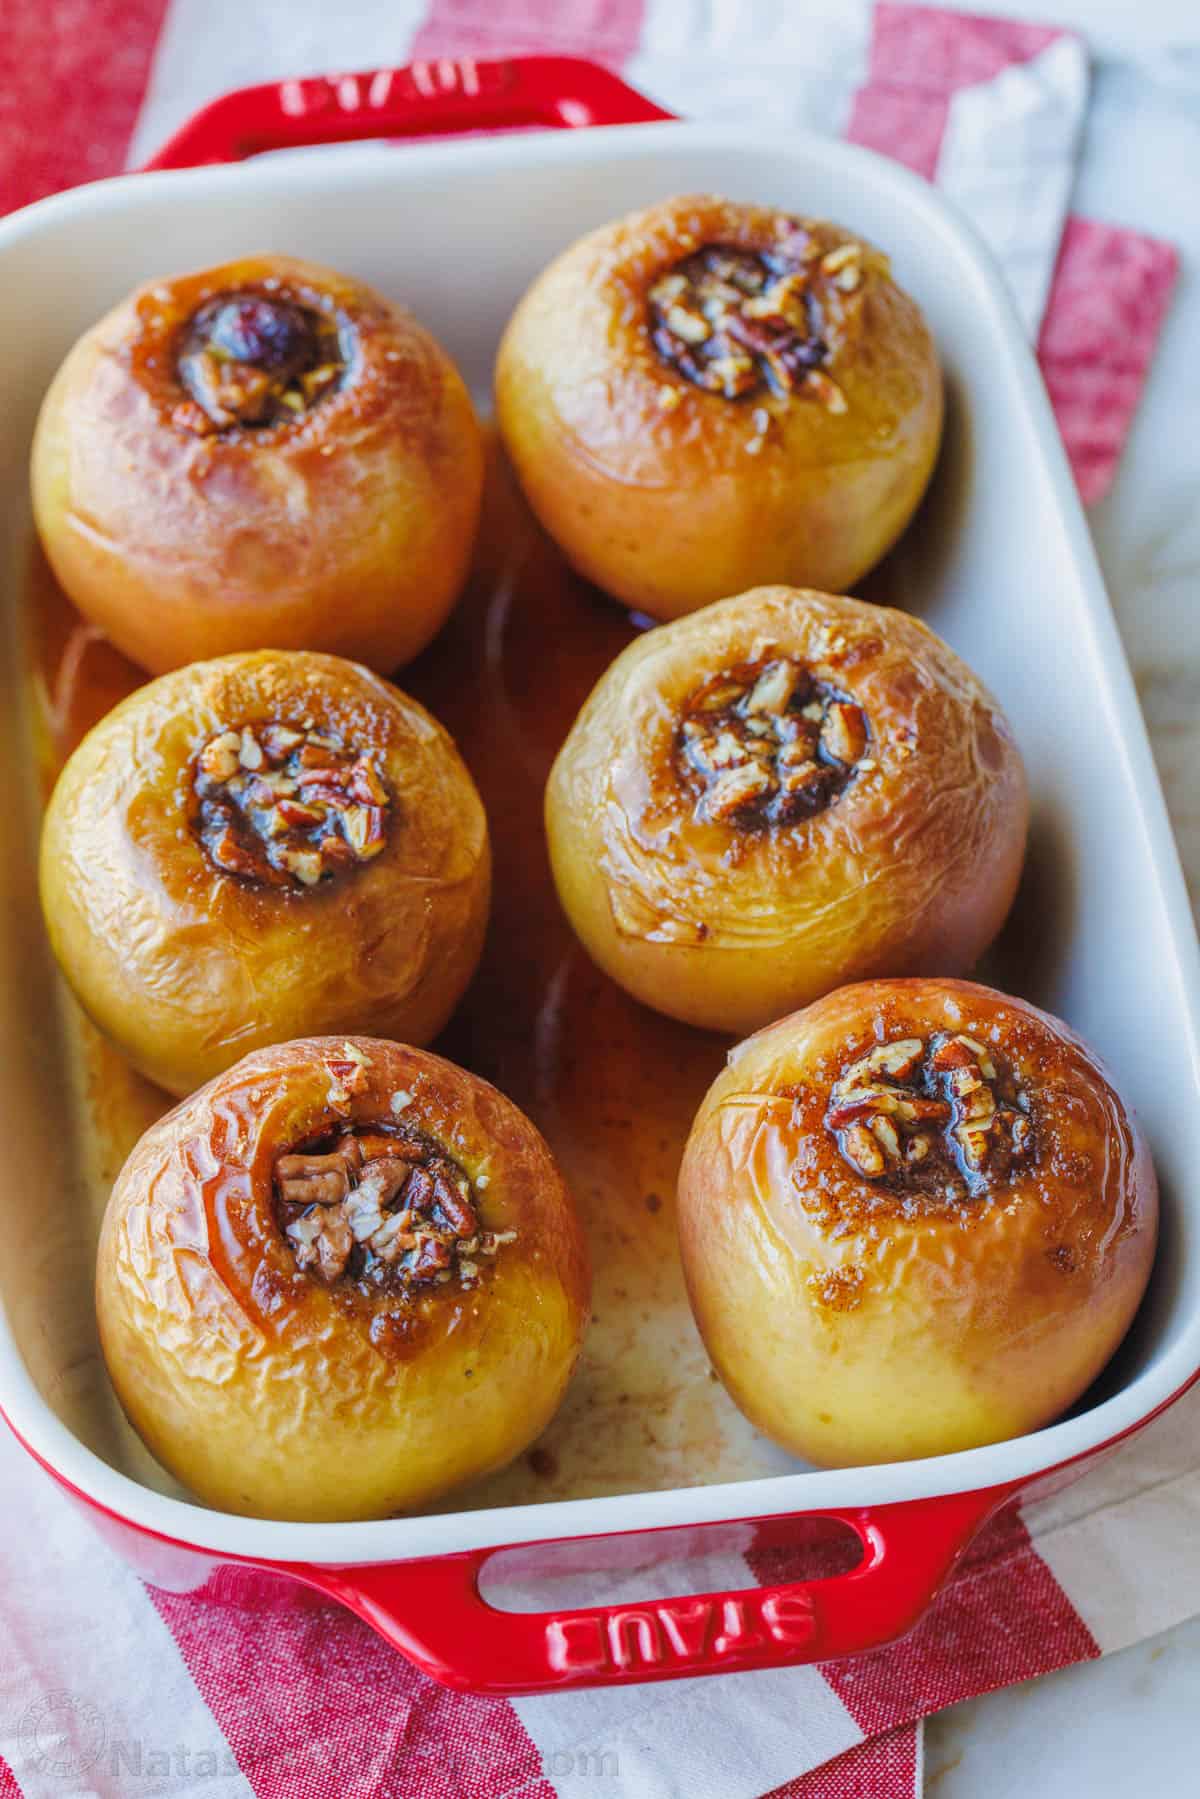 Baked apples filled with cinnamon sugar in a rectangular baking dish.